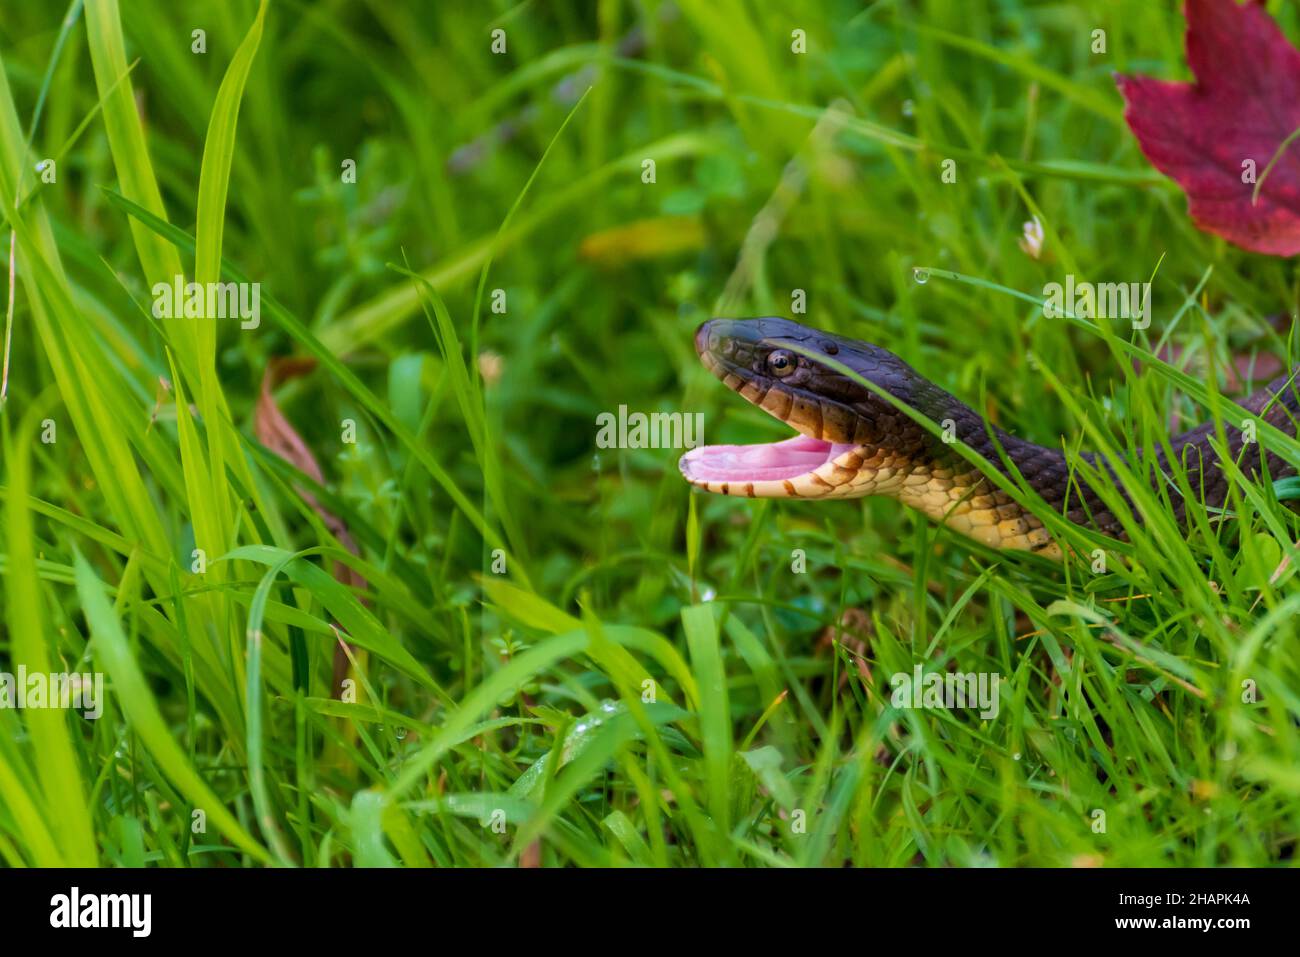 Plain-bellied water snake with mouth wide open Stock Photo